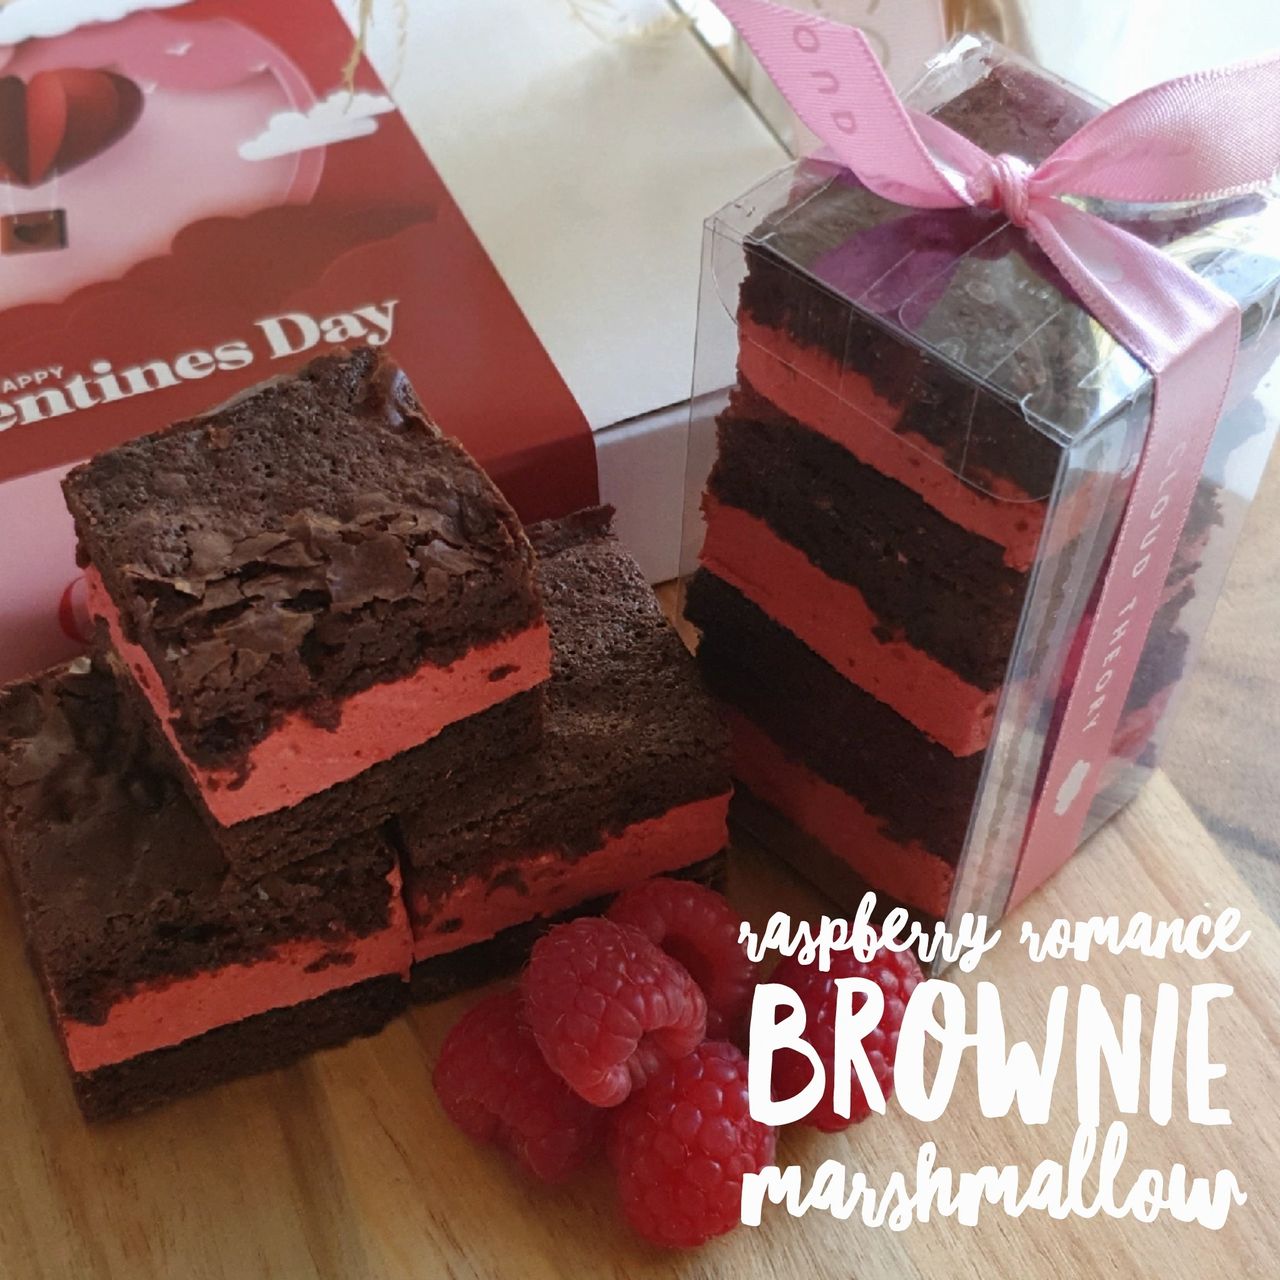 Raspberry Romance Marshmallow Brownie -A match made in heaven! We have paired raspberry flavoured marshmallows with our decadent brownie base to create one romantic treat!